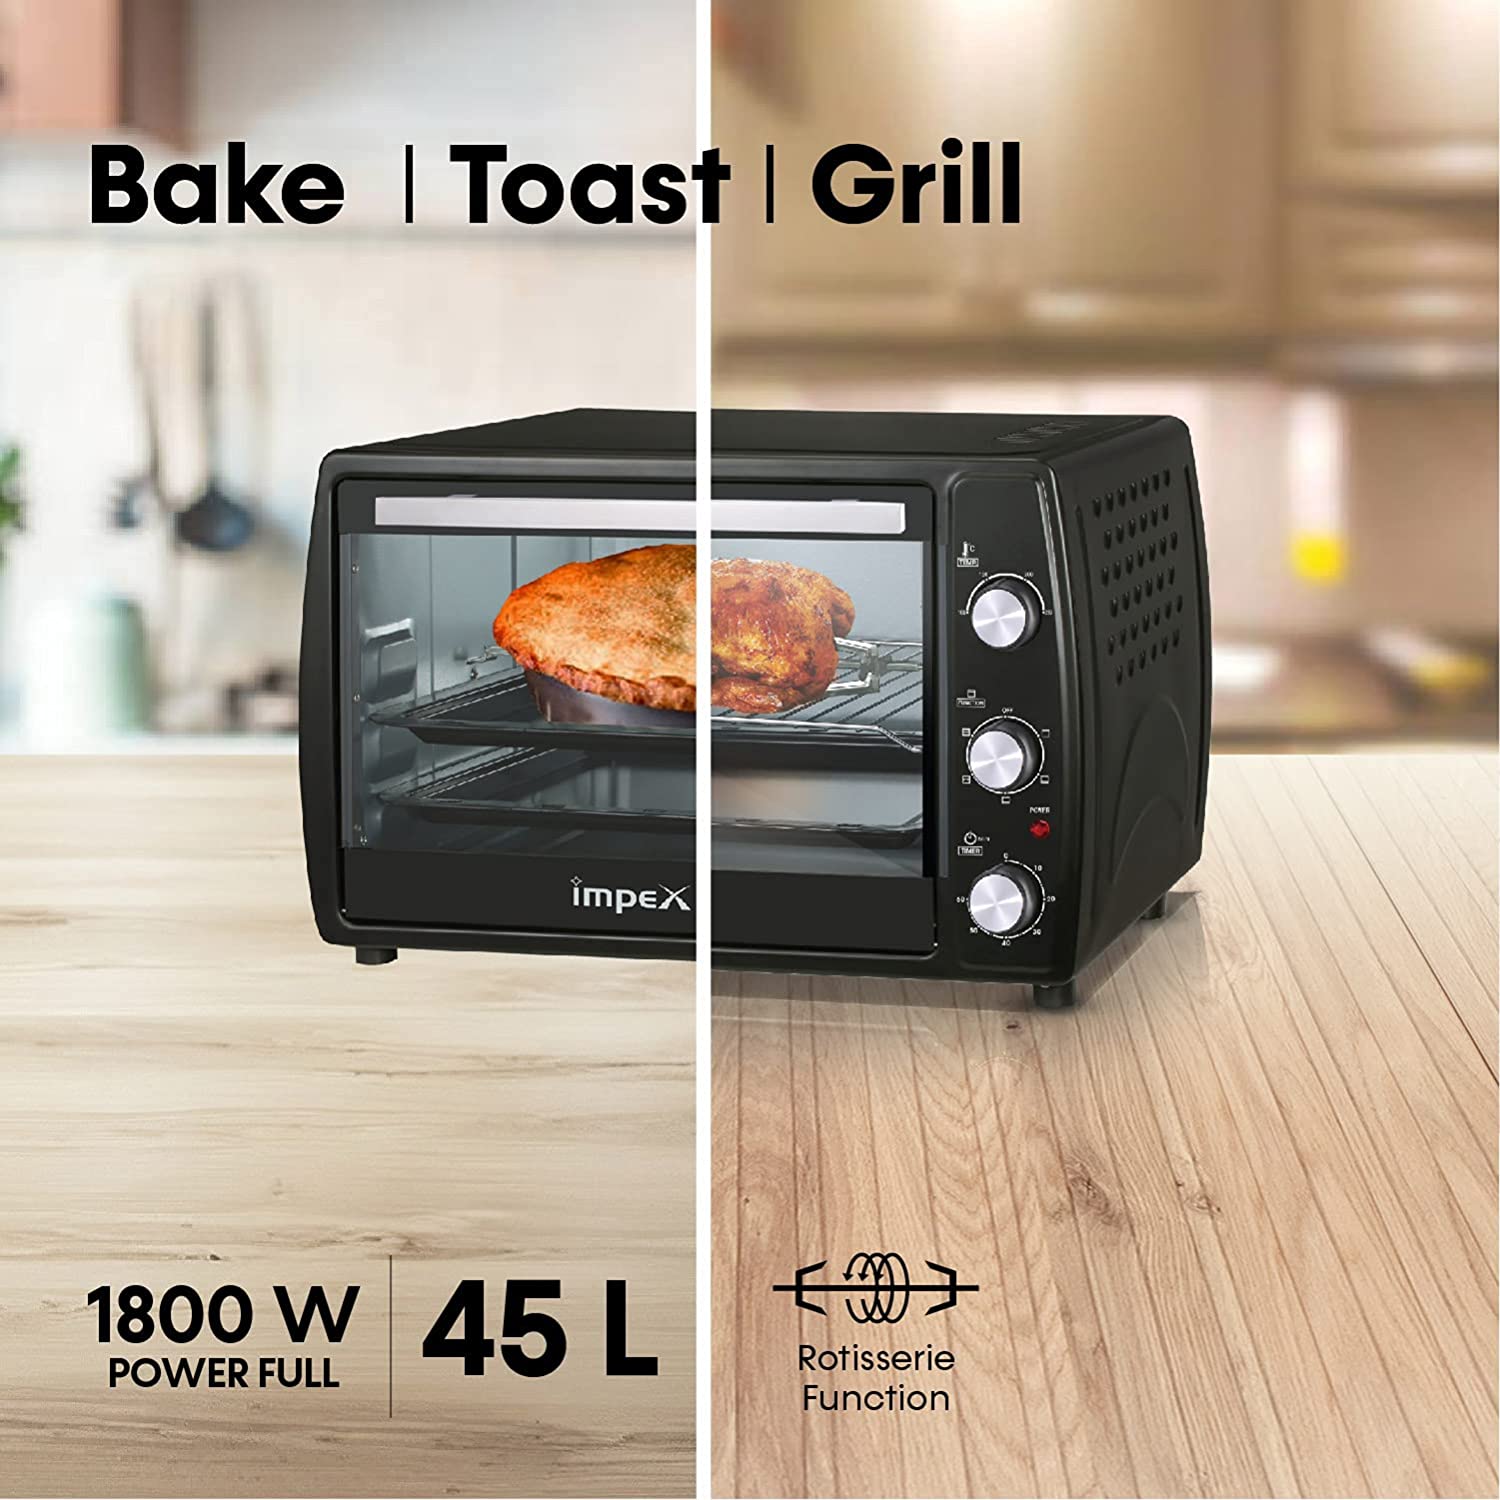 Impex OV 2902 1800W 45 Litre Oven Toaster Grill (OTG) with Convection and Rotisserie Function 100-250 Temperature setting, Black